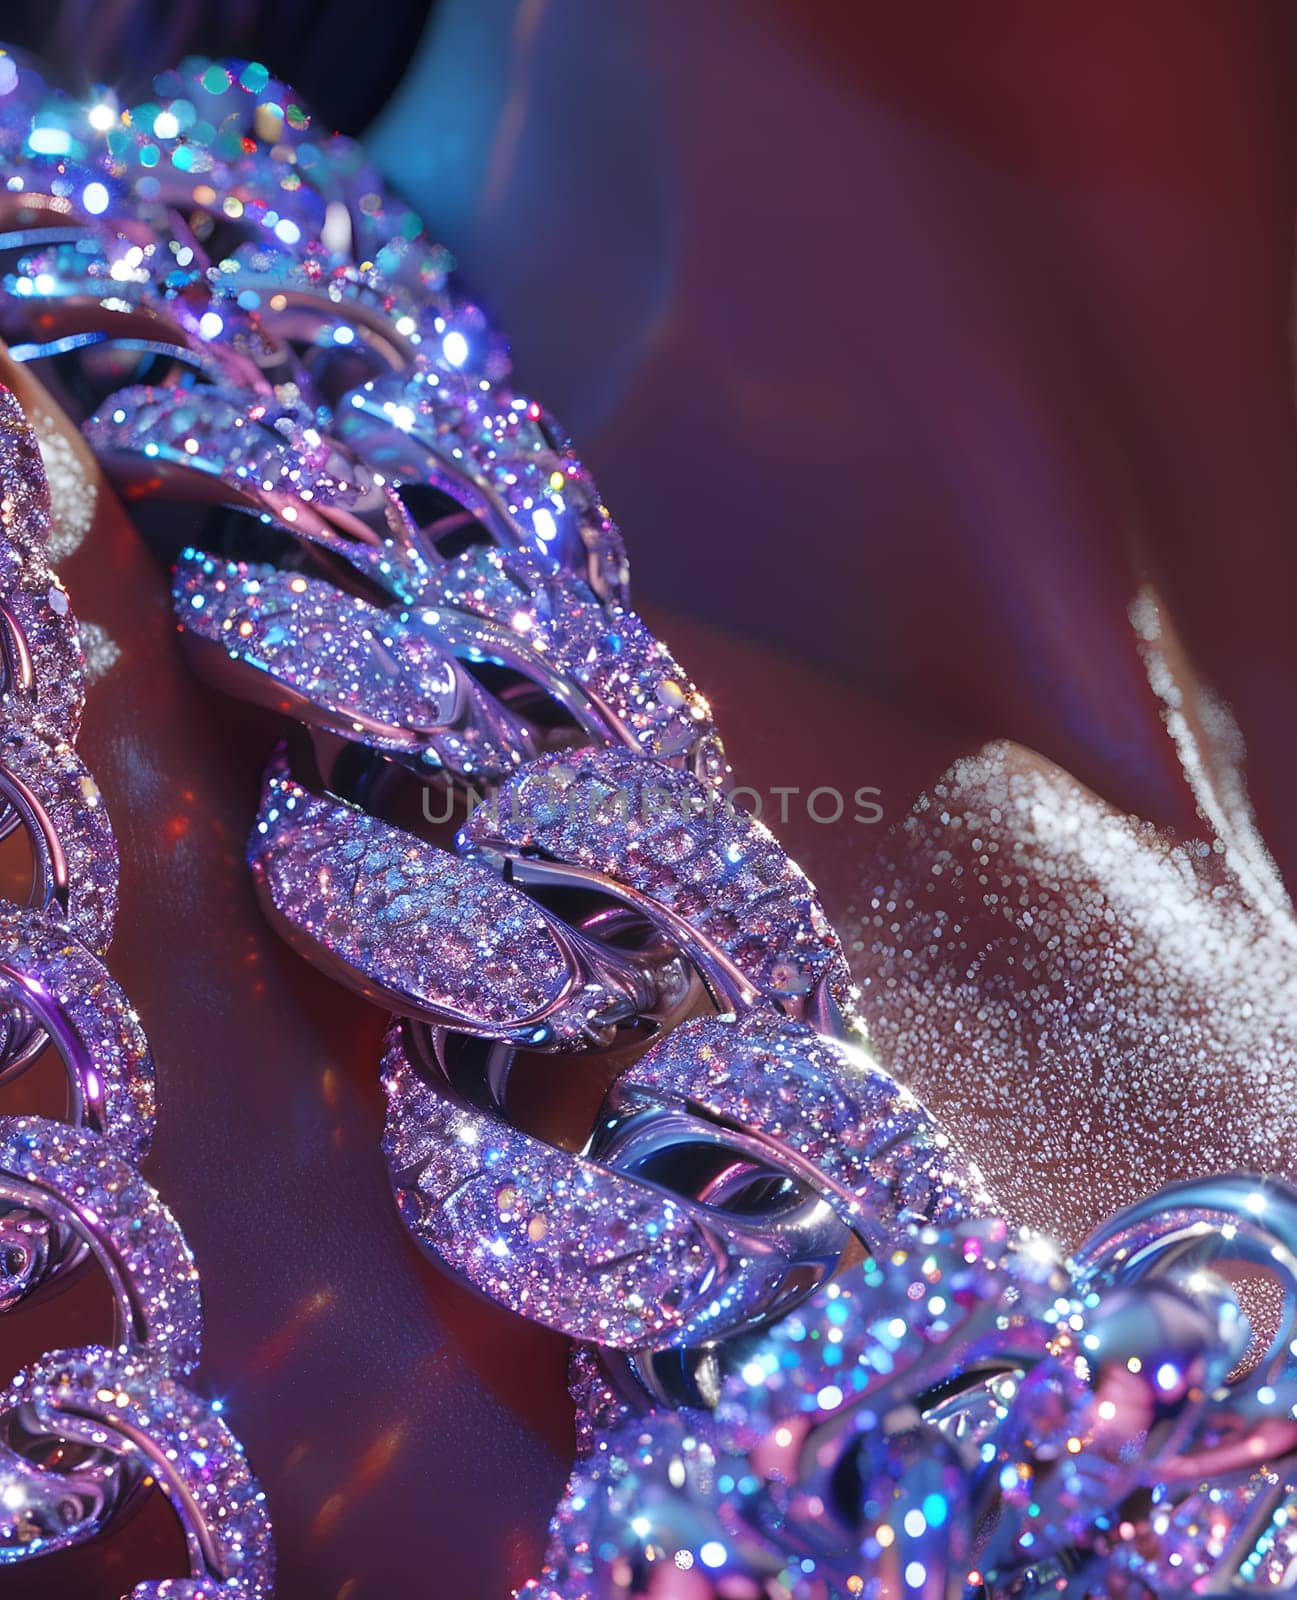 A close up of a purple chain with diamond petals resembling a terrestrial plant. The violet hue combined with electric blue and magenta accents make it a stunning piece of jewelry